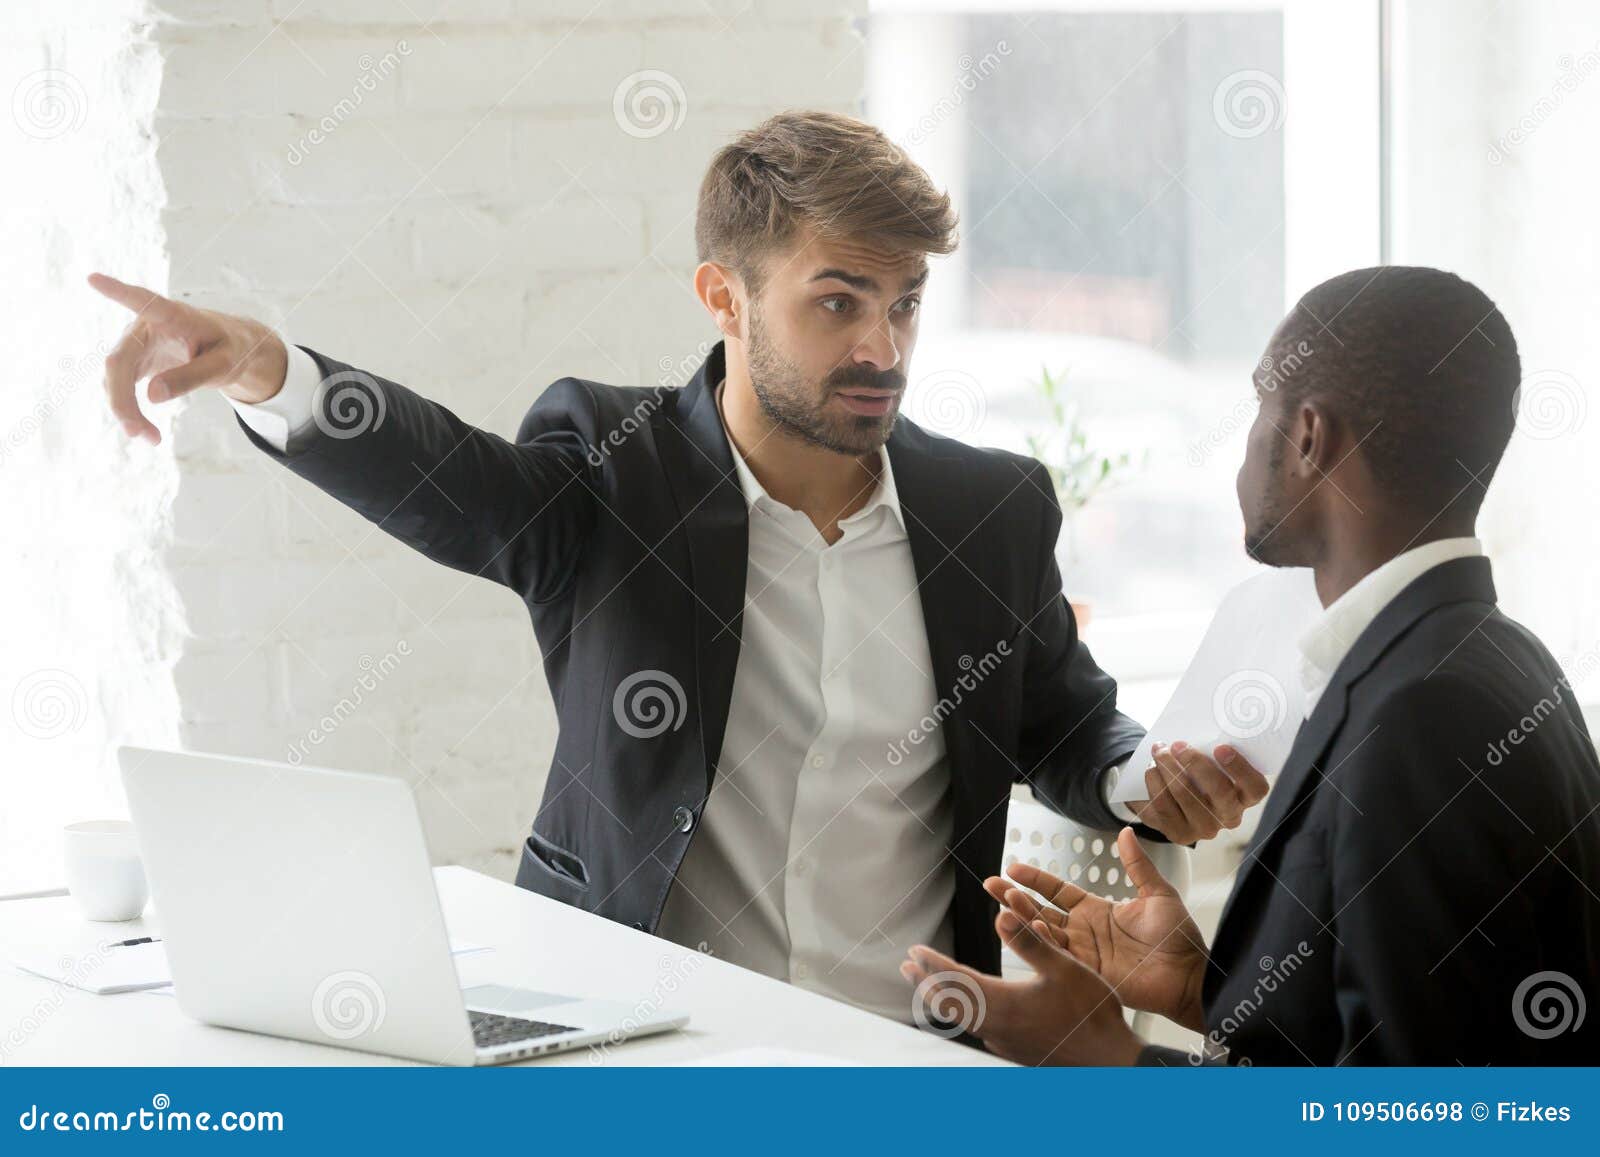 angry-rude-caucasian-executive-firing-male-incompetent-african-employee-bad-work-impolite-white-partner-telling-black-109506698.jpg